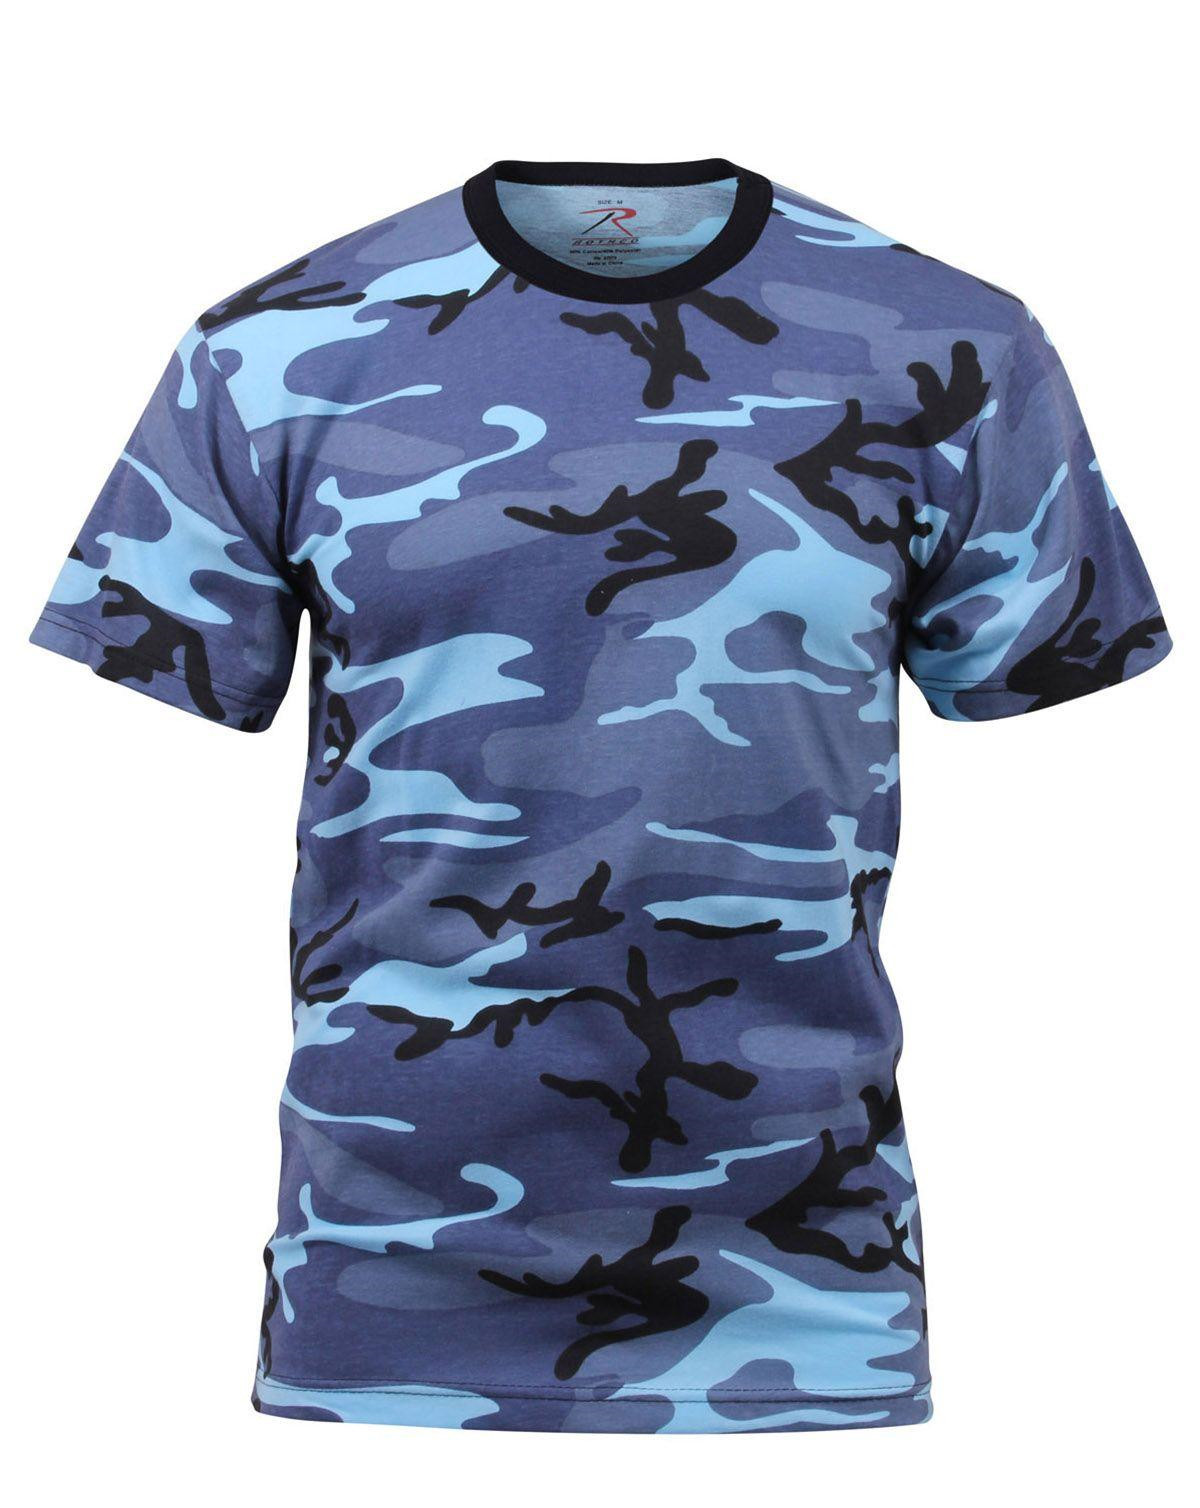 Rothco T-shirt - Mange Camouflager (Sky Blue Camo, L)